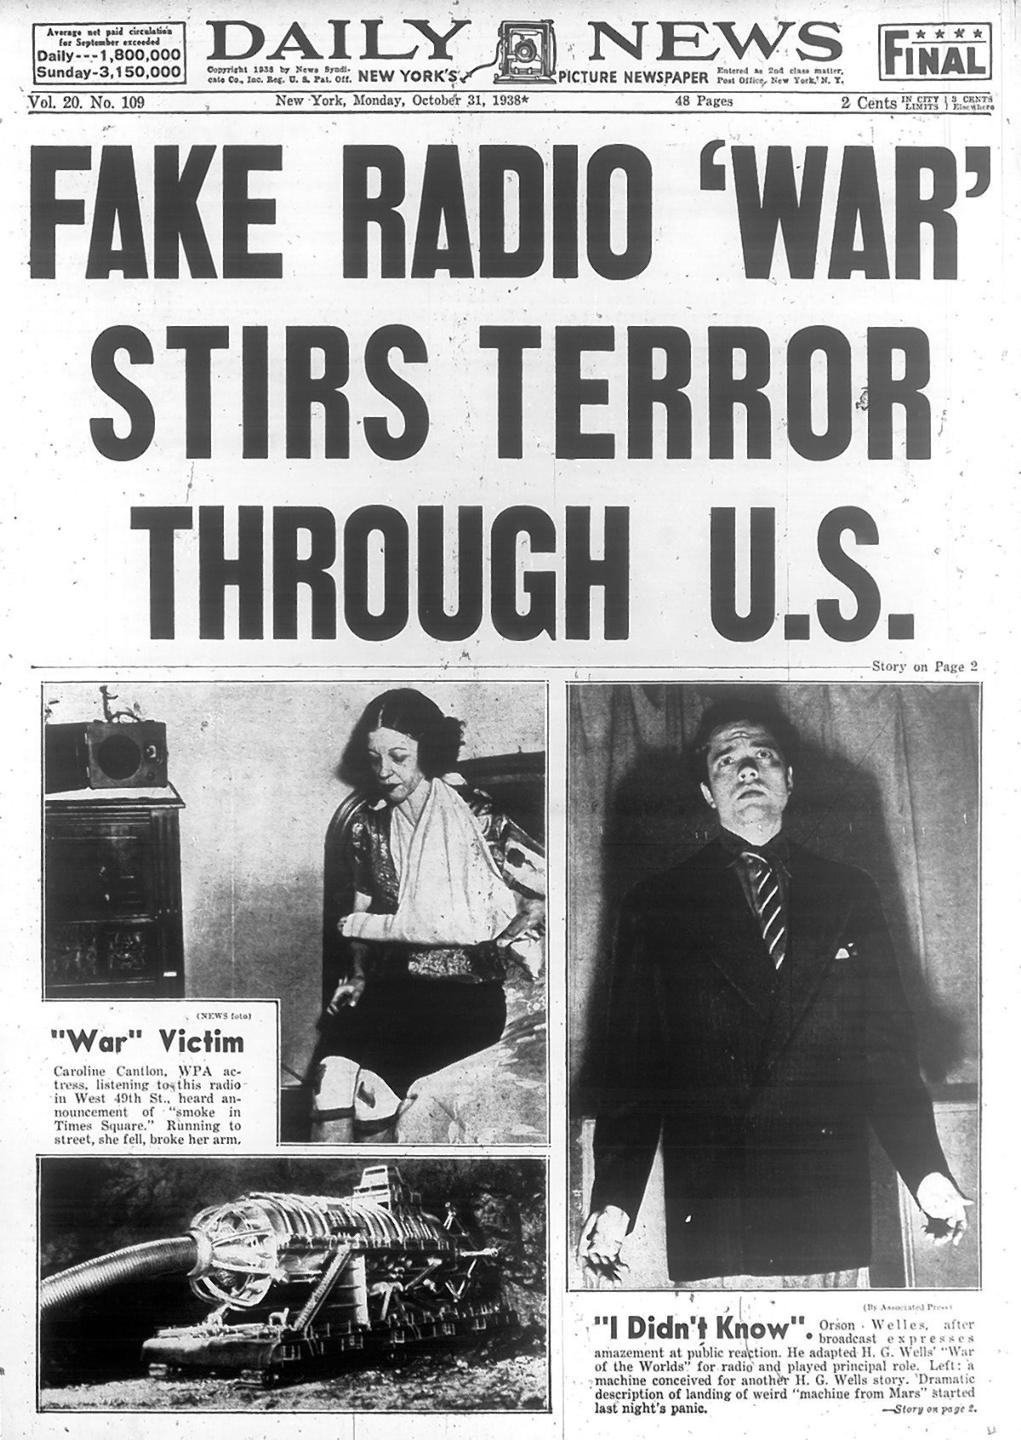 1938- Orson Welles narrates H.G. Well’s “The War Of The Worlds” on the radio and causes a mass panic